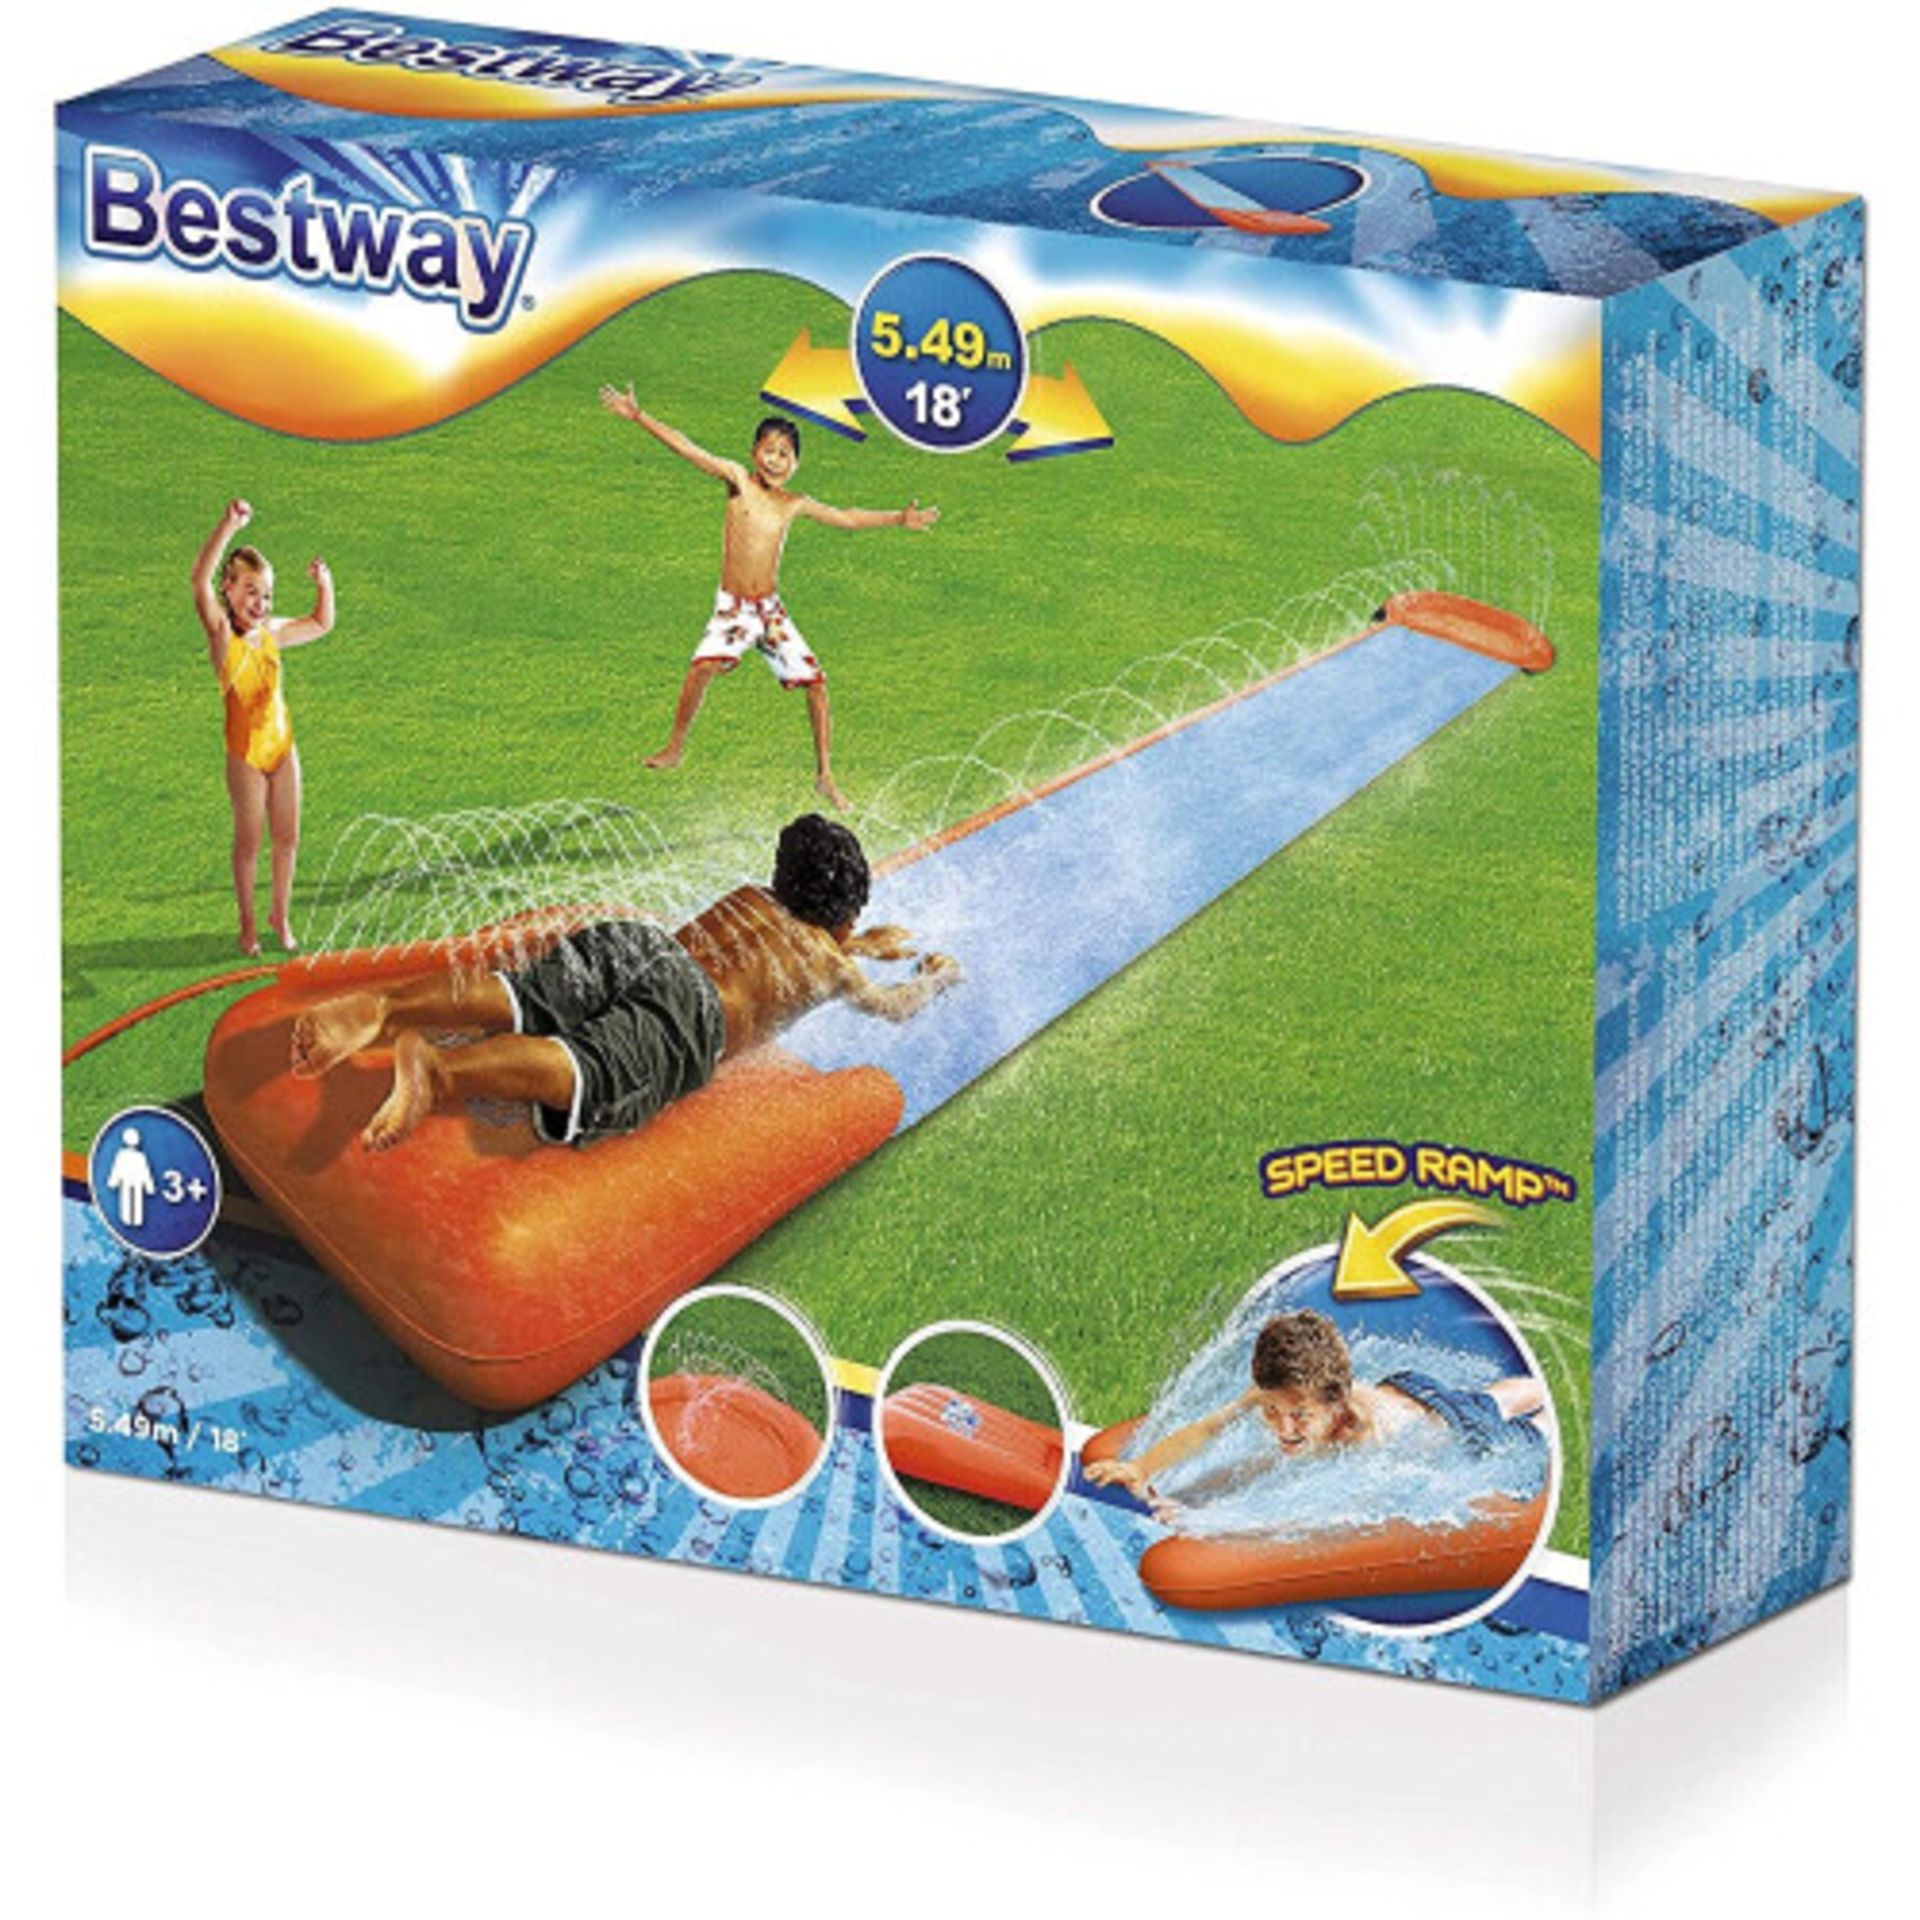 8 X BRAND NEW BESTWAY SINGLE SLIP AND SLIDE WITH INFLATABLE SPEED RAMP WITH SPRINKLERS 5.5 M